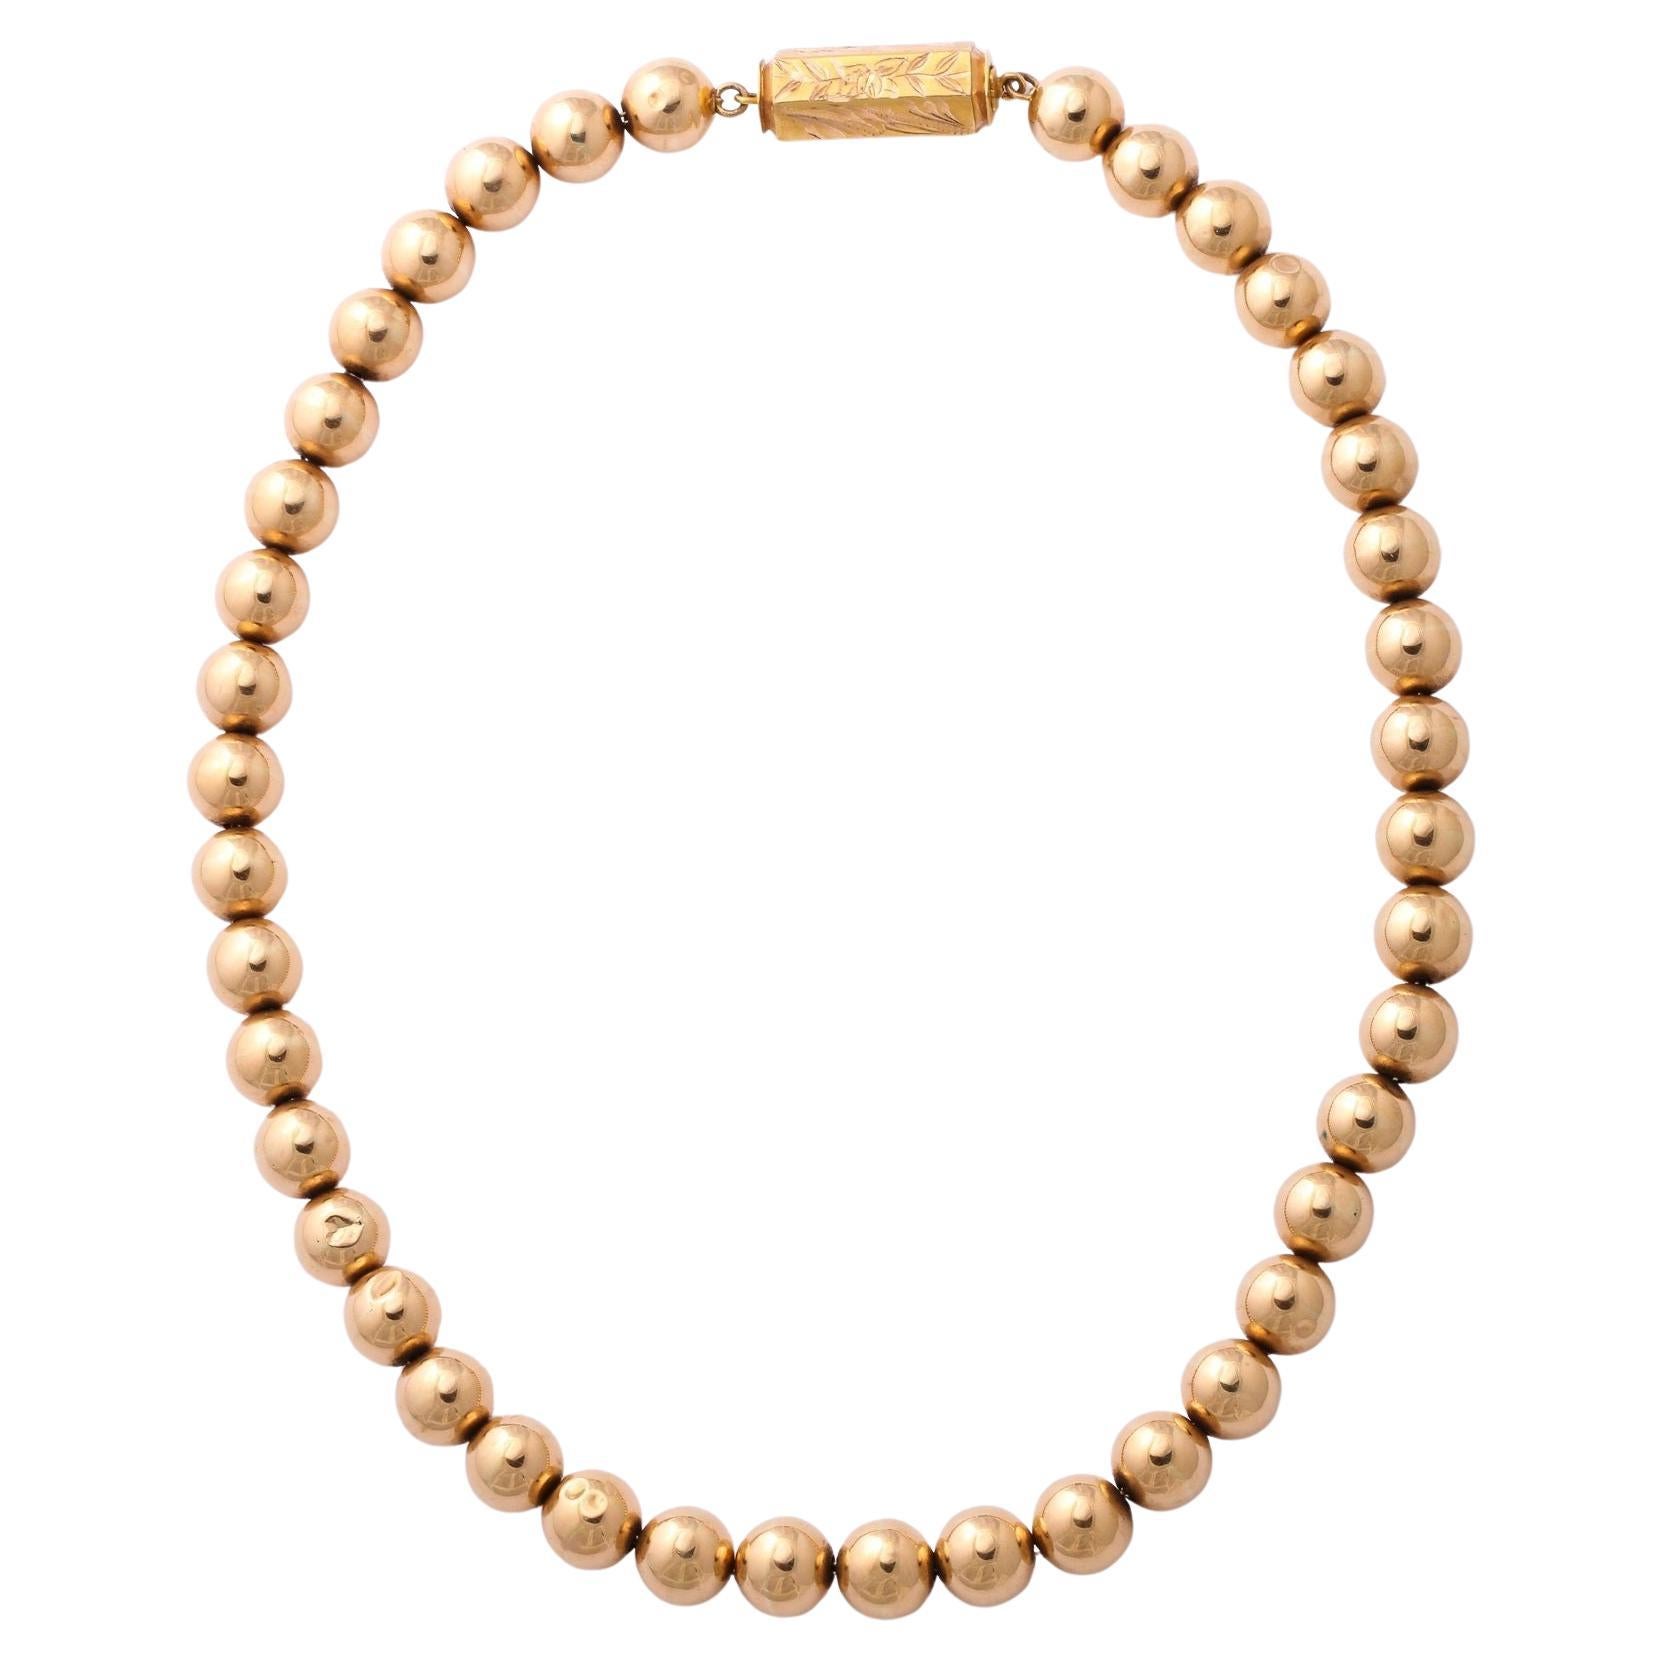 Antique French Gold Bead Necklace